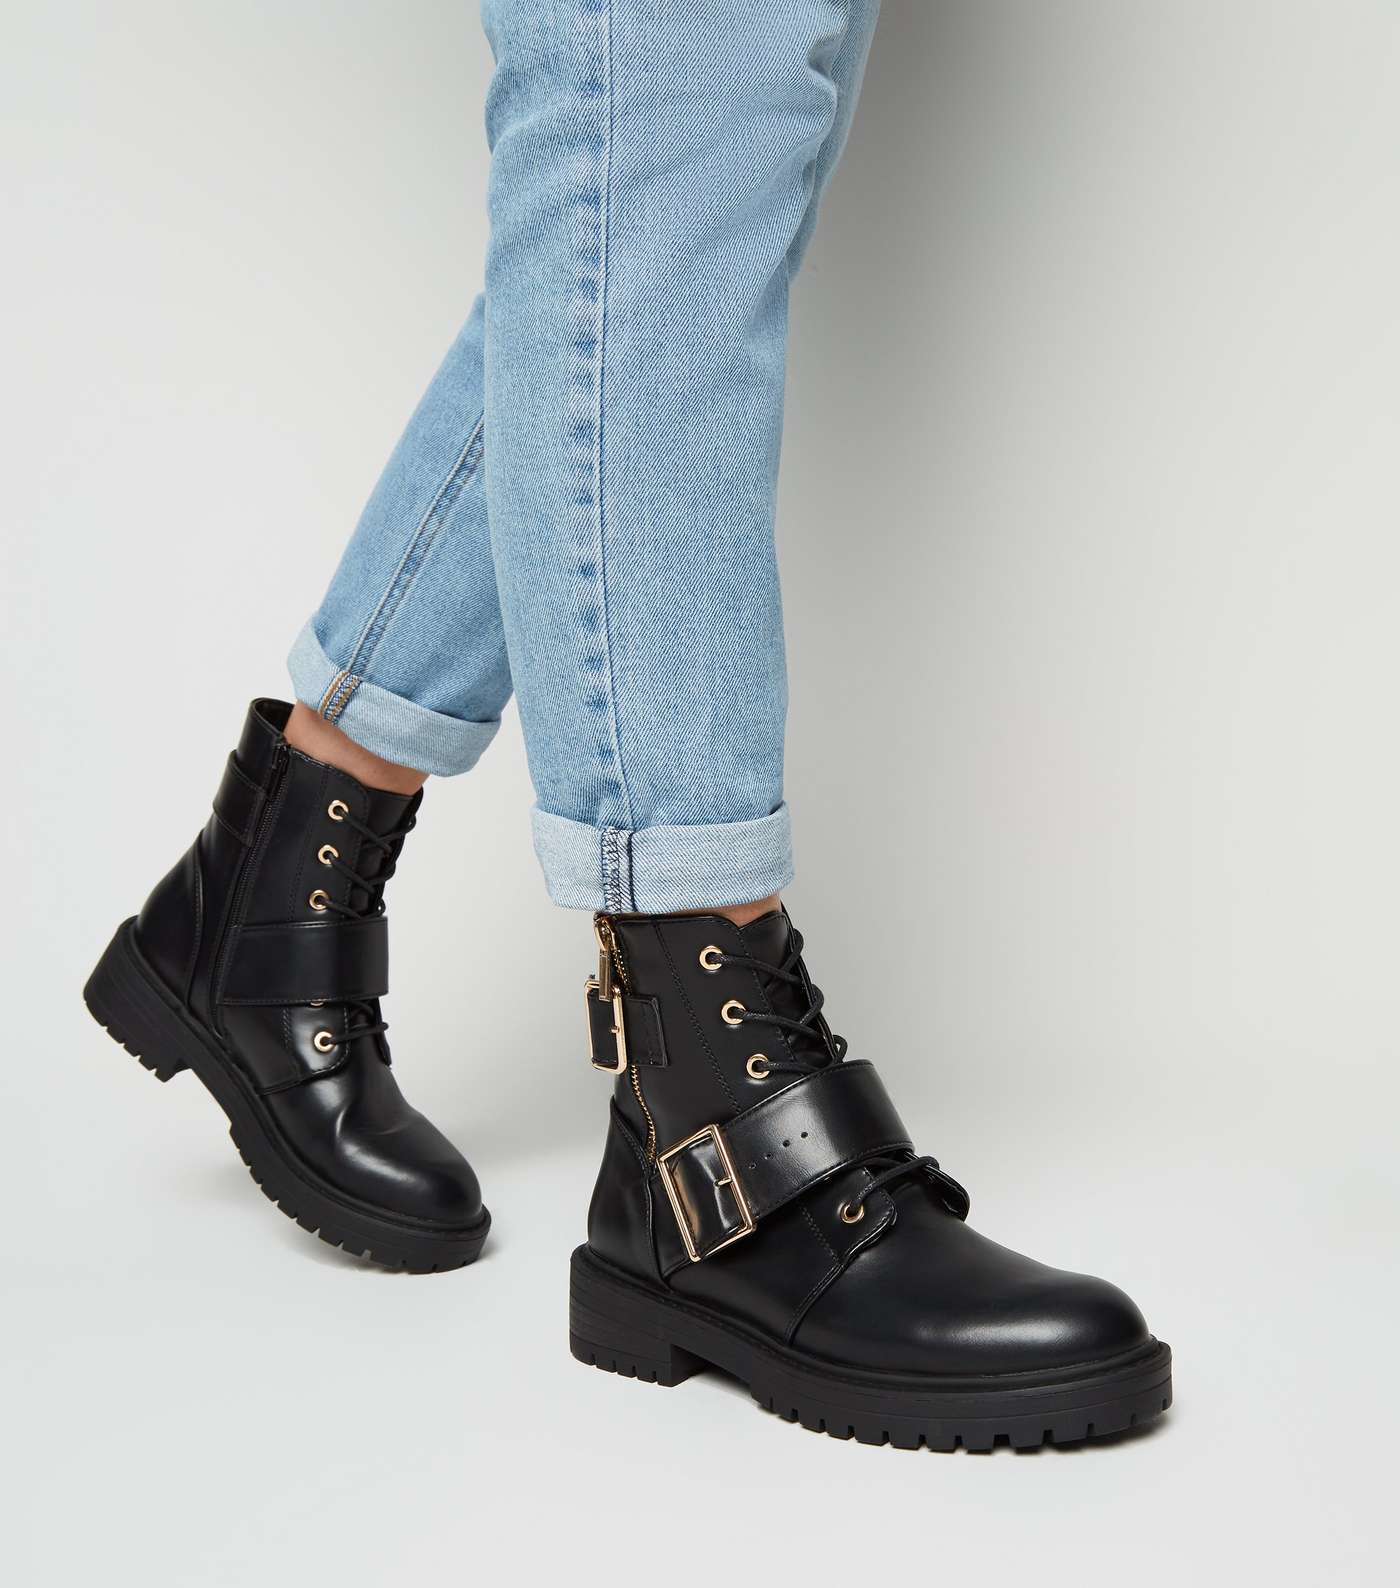 Black Leather-Look Lace Up Buckle Boots Image 2